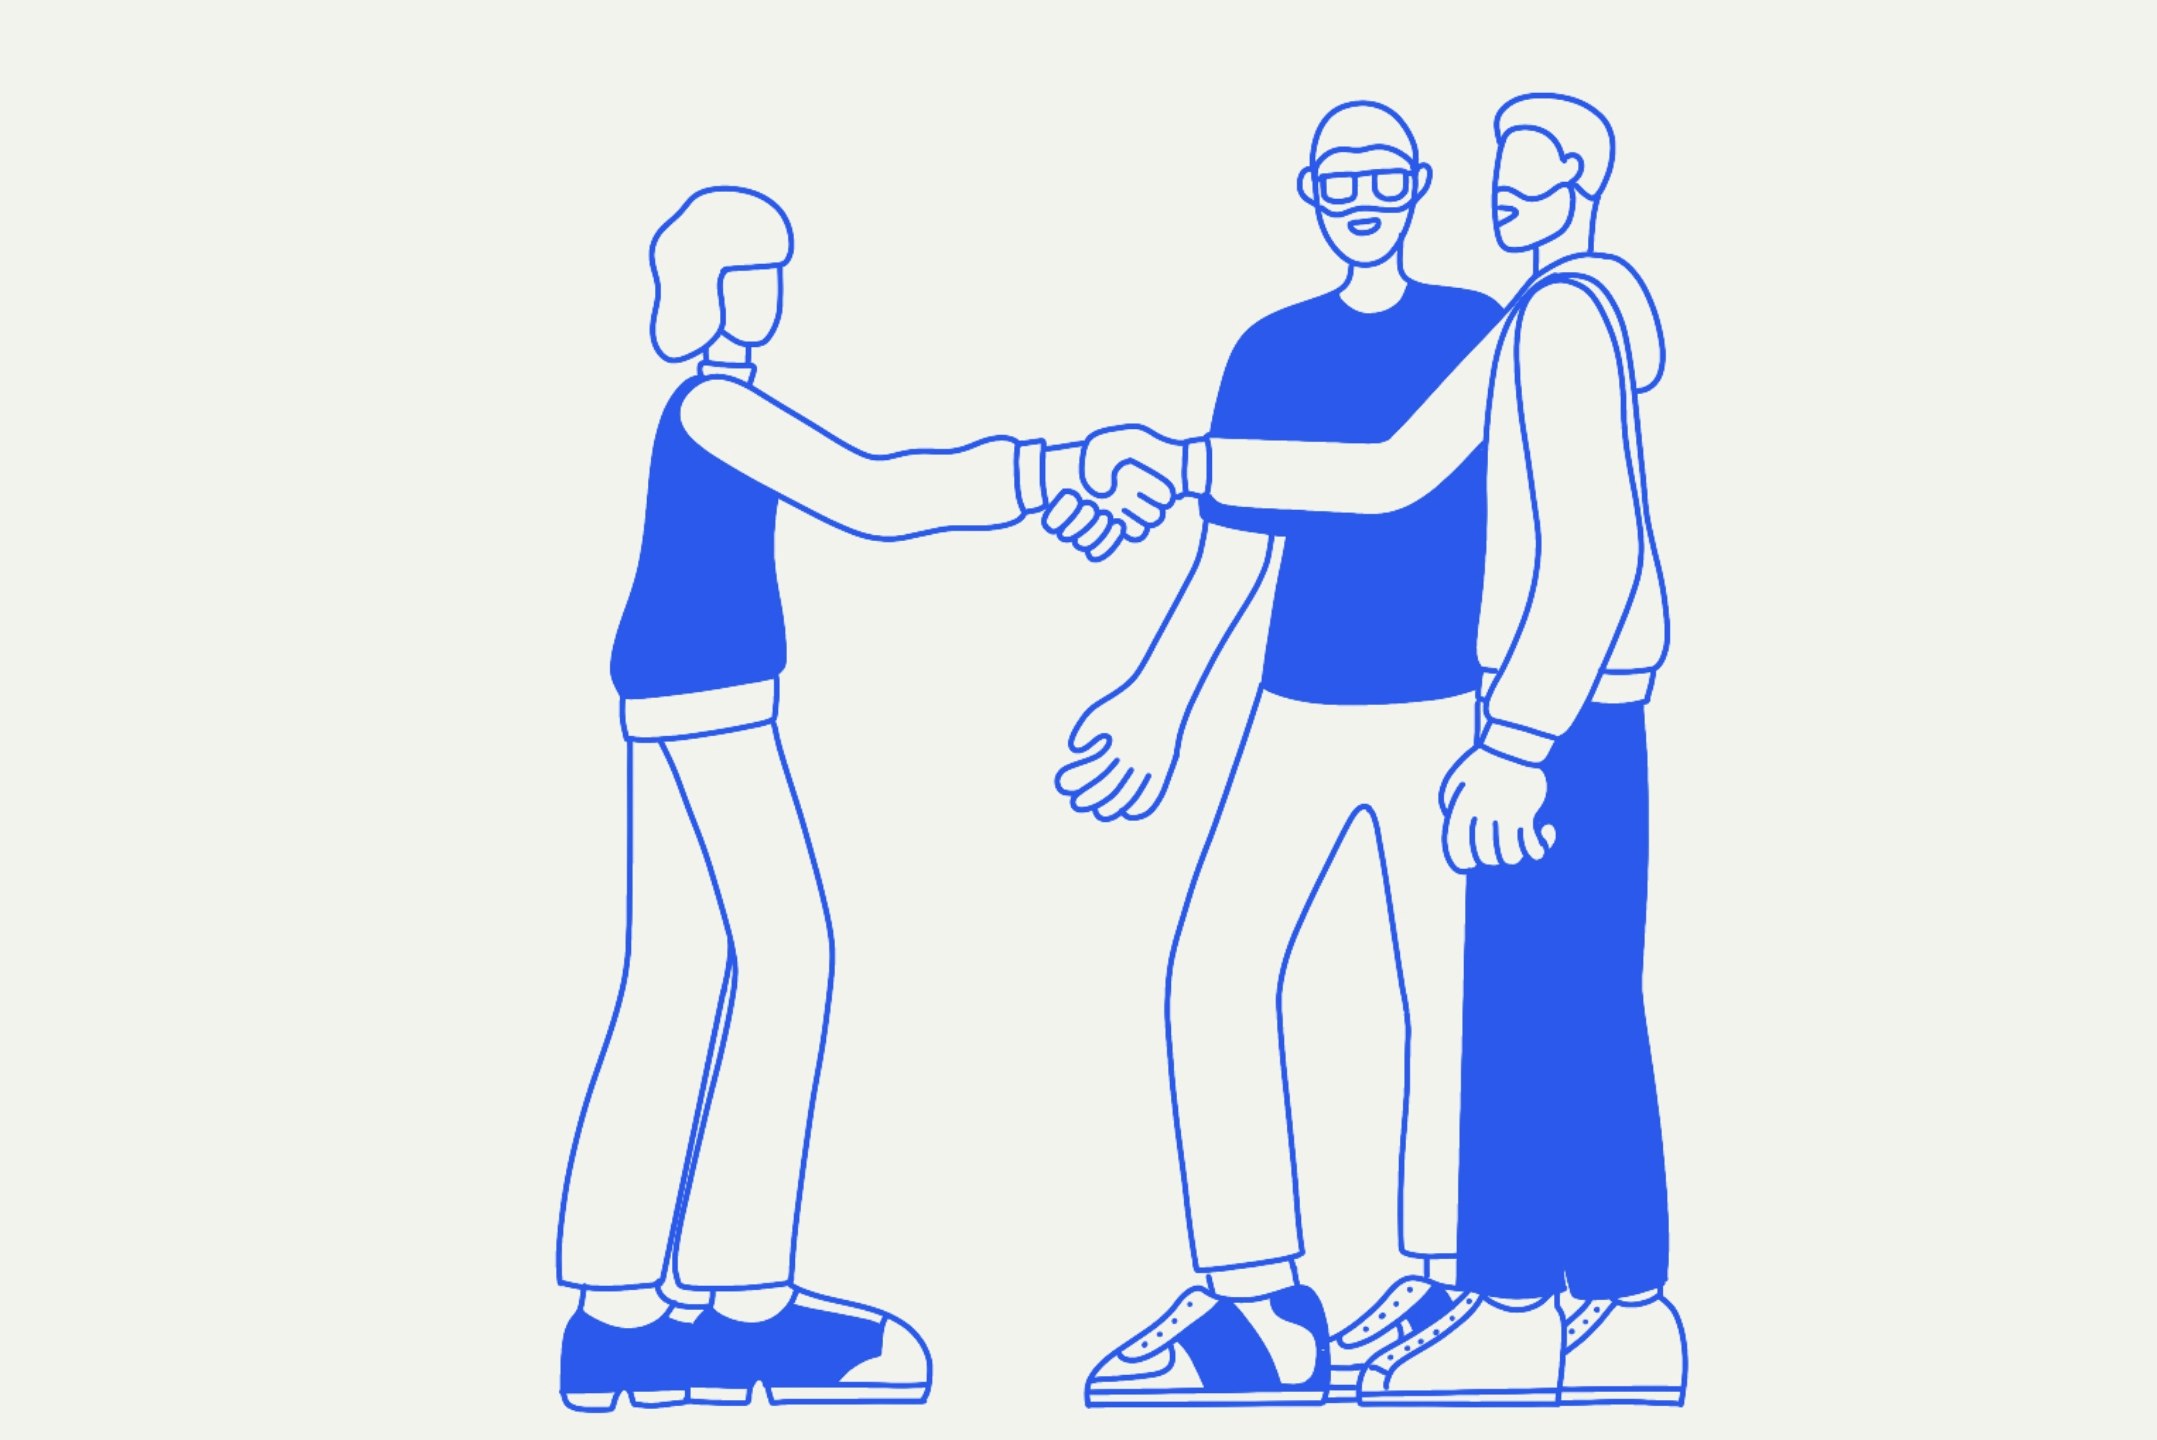 Three people and two of them shaking hands